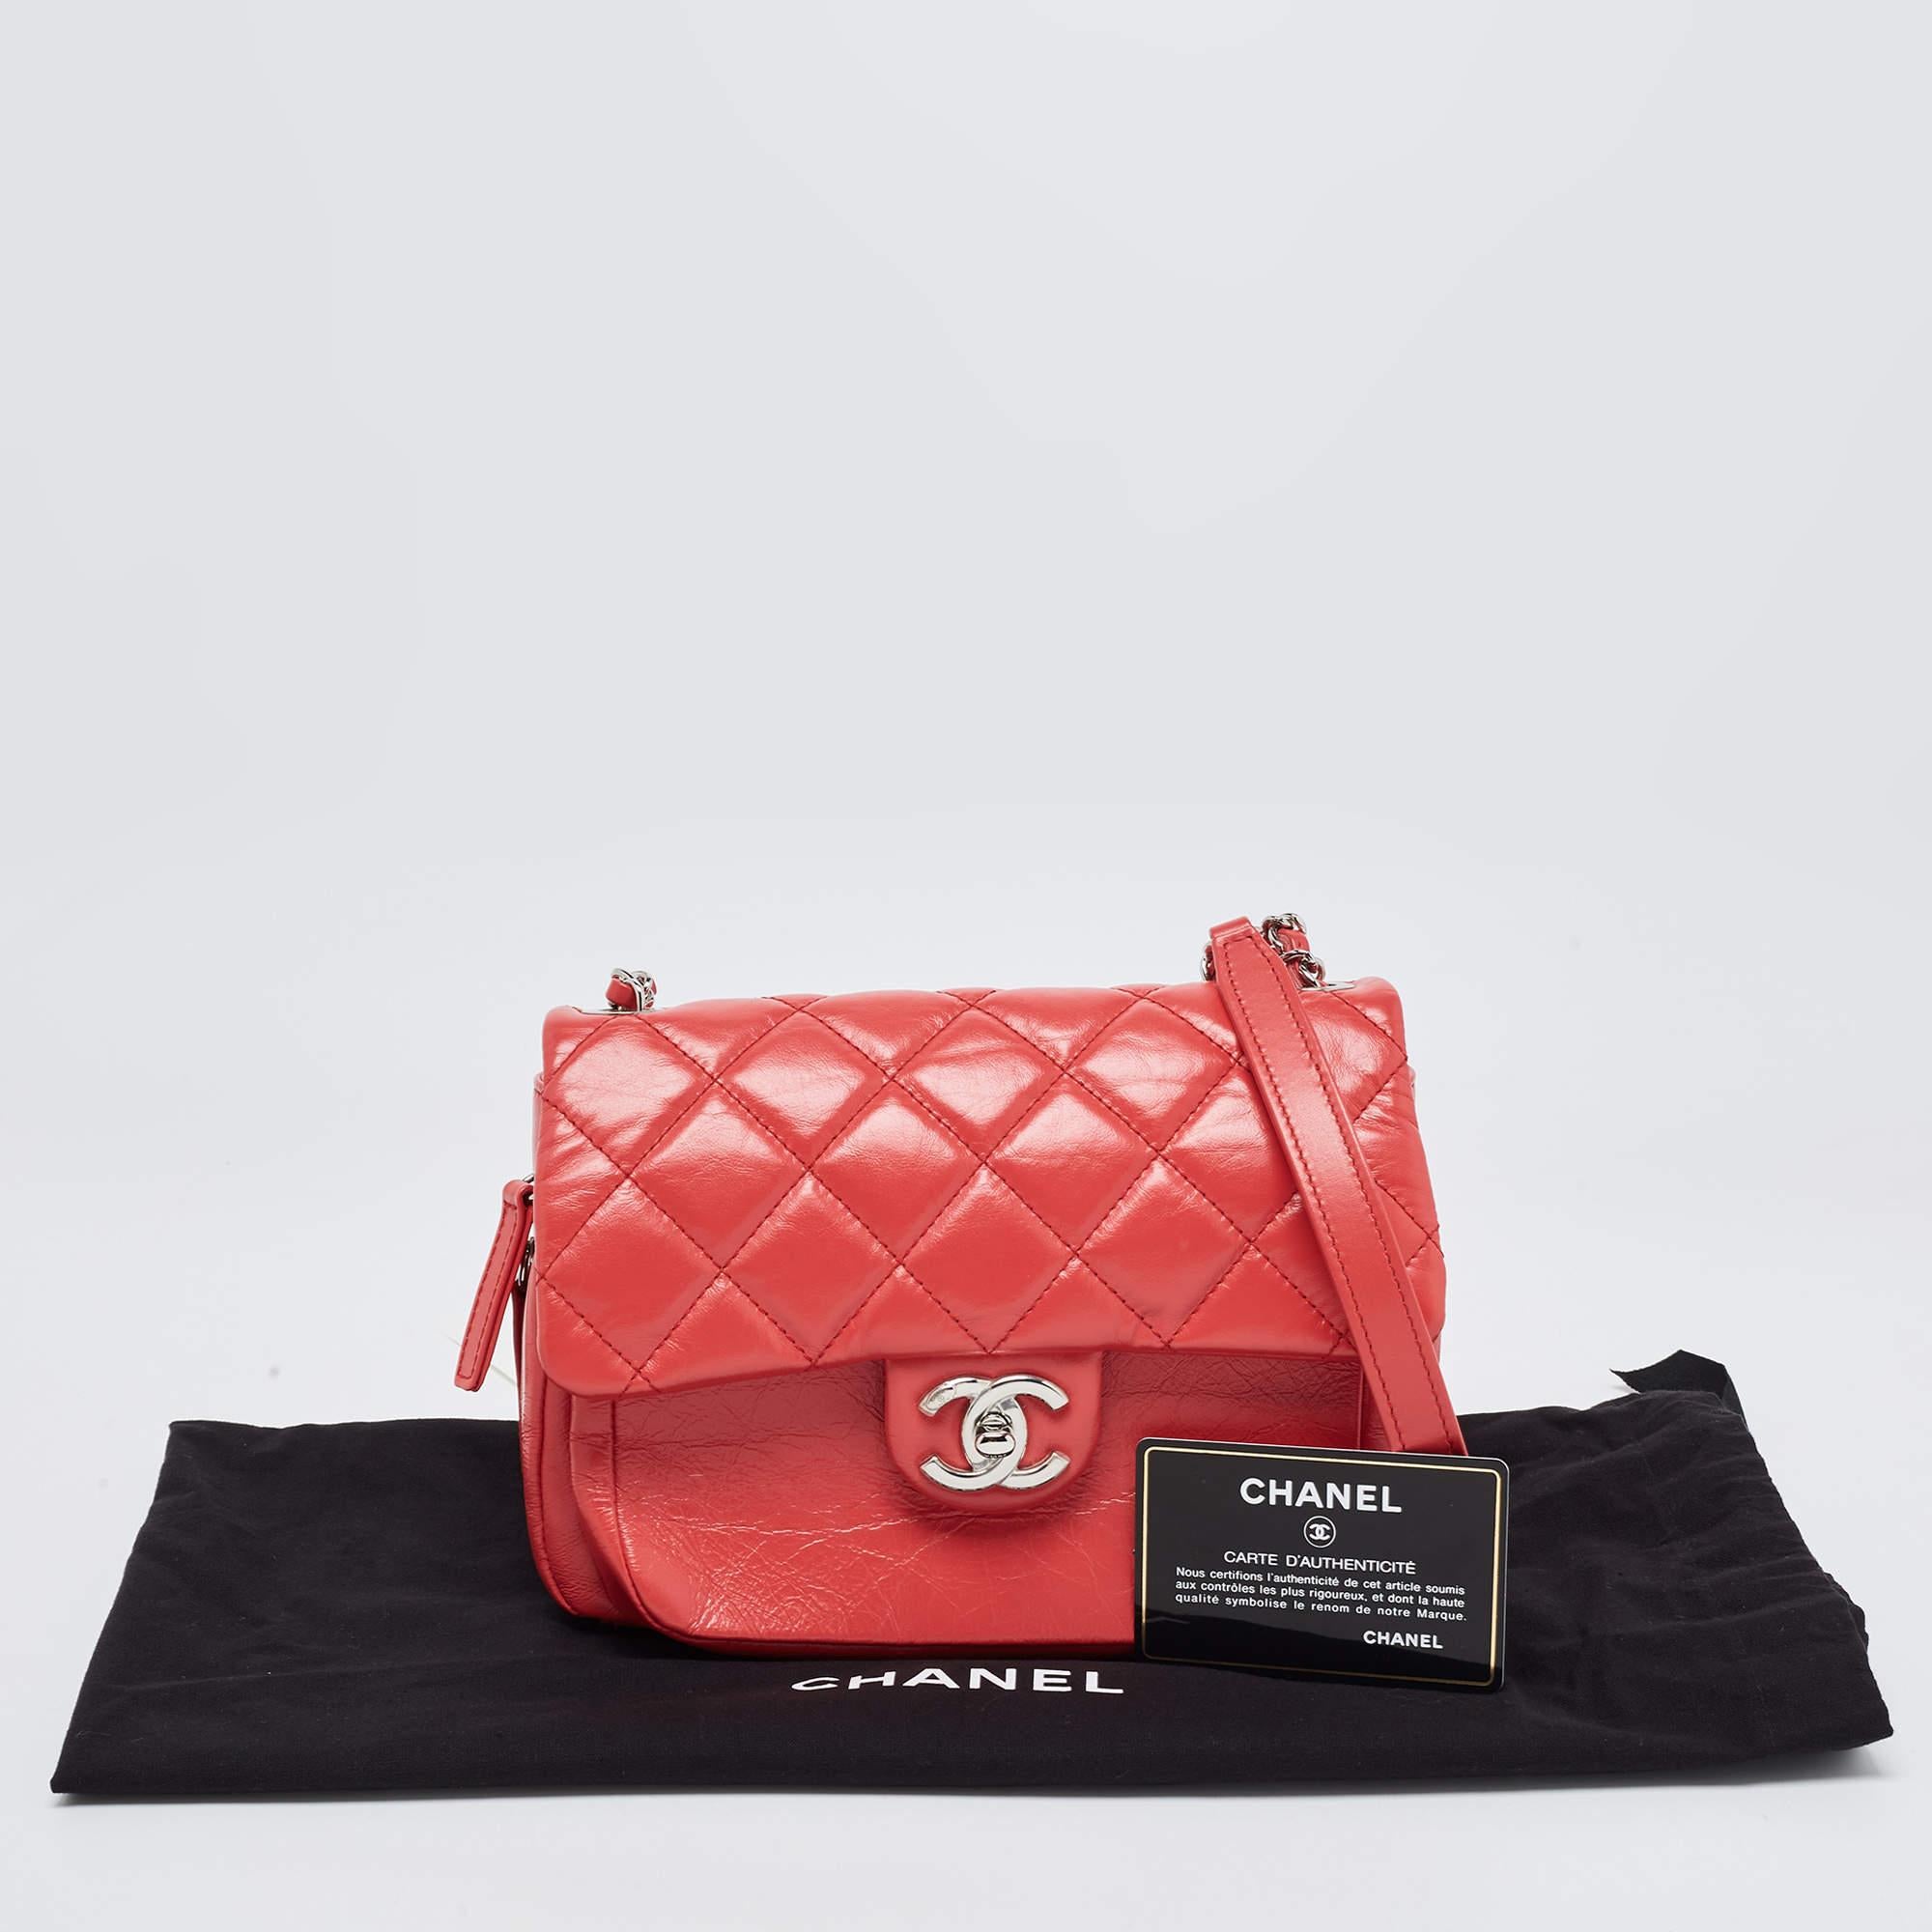 Chanel Pink Coral Quilted Leather Express Zip Around Flap Bag 12